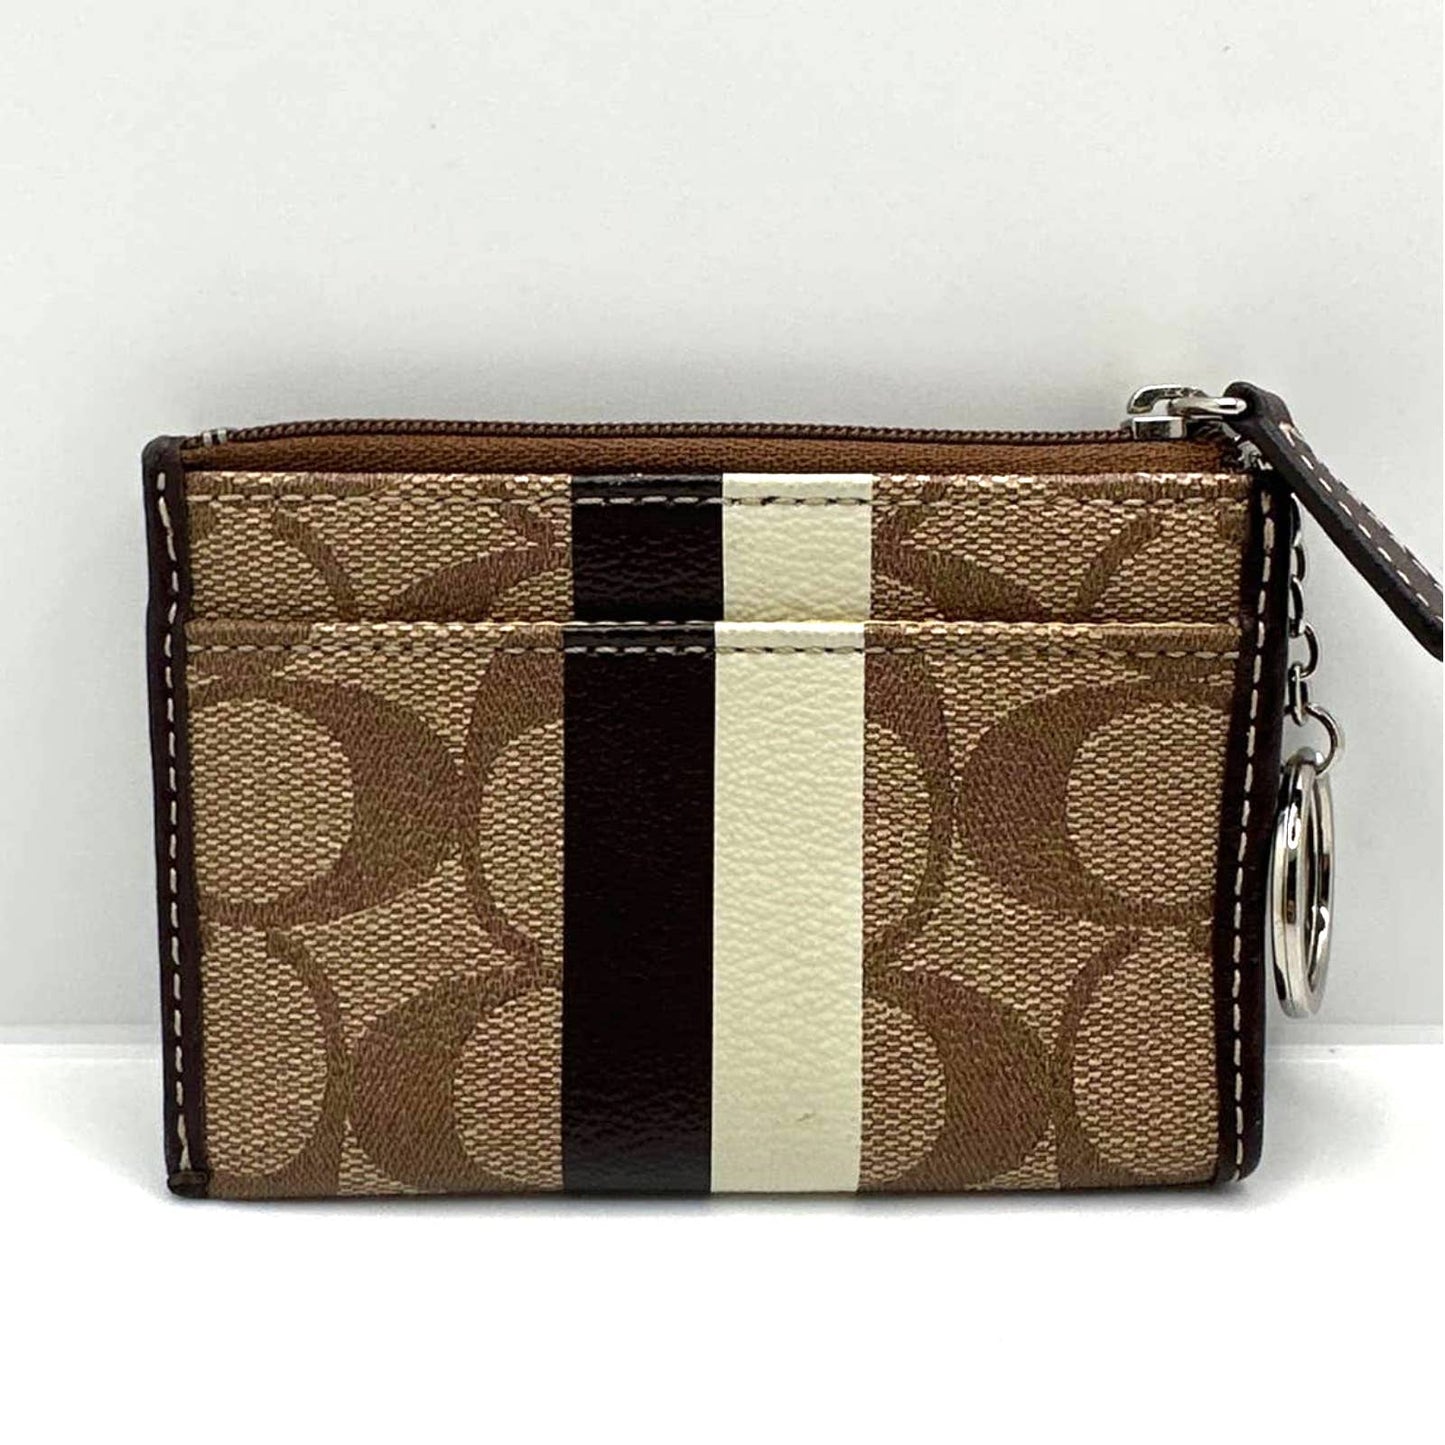 COACH Brown and Cream Coated Canvas Coin Purse / Cardholder with Keychain